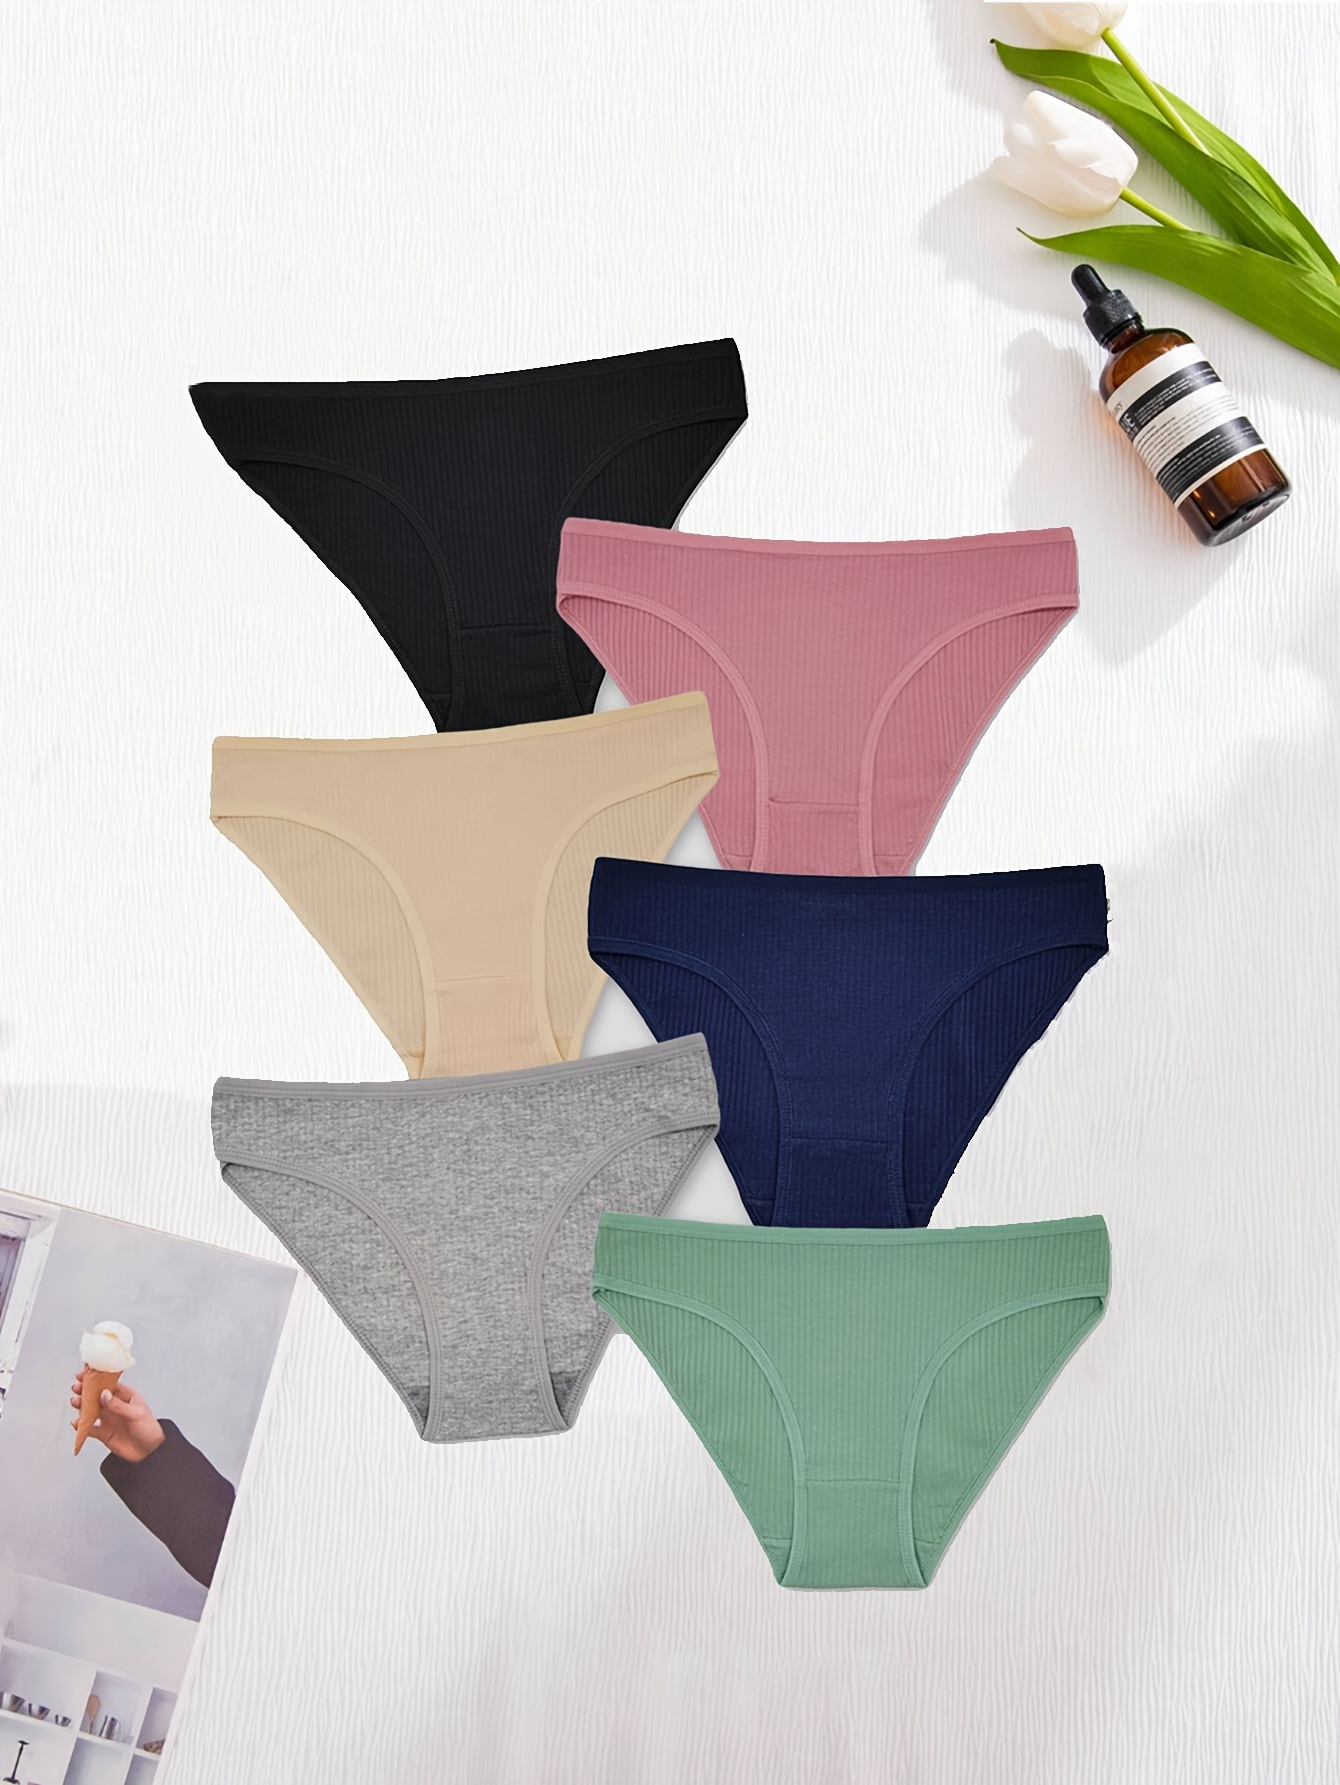 6pcs Seamless Quick Dry Briefs, Comfy Breathable Stretchy Intimates  Panties, Women's Lingerie & Underwear